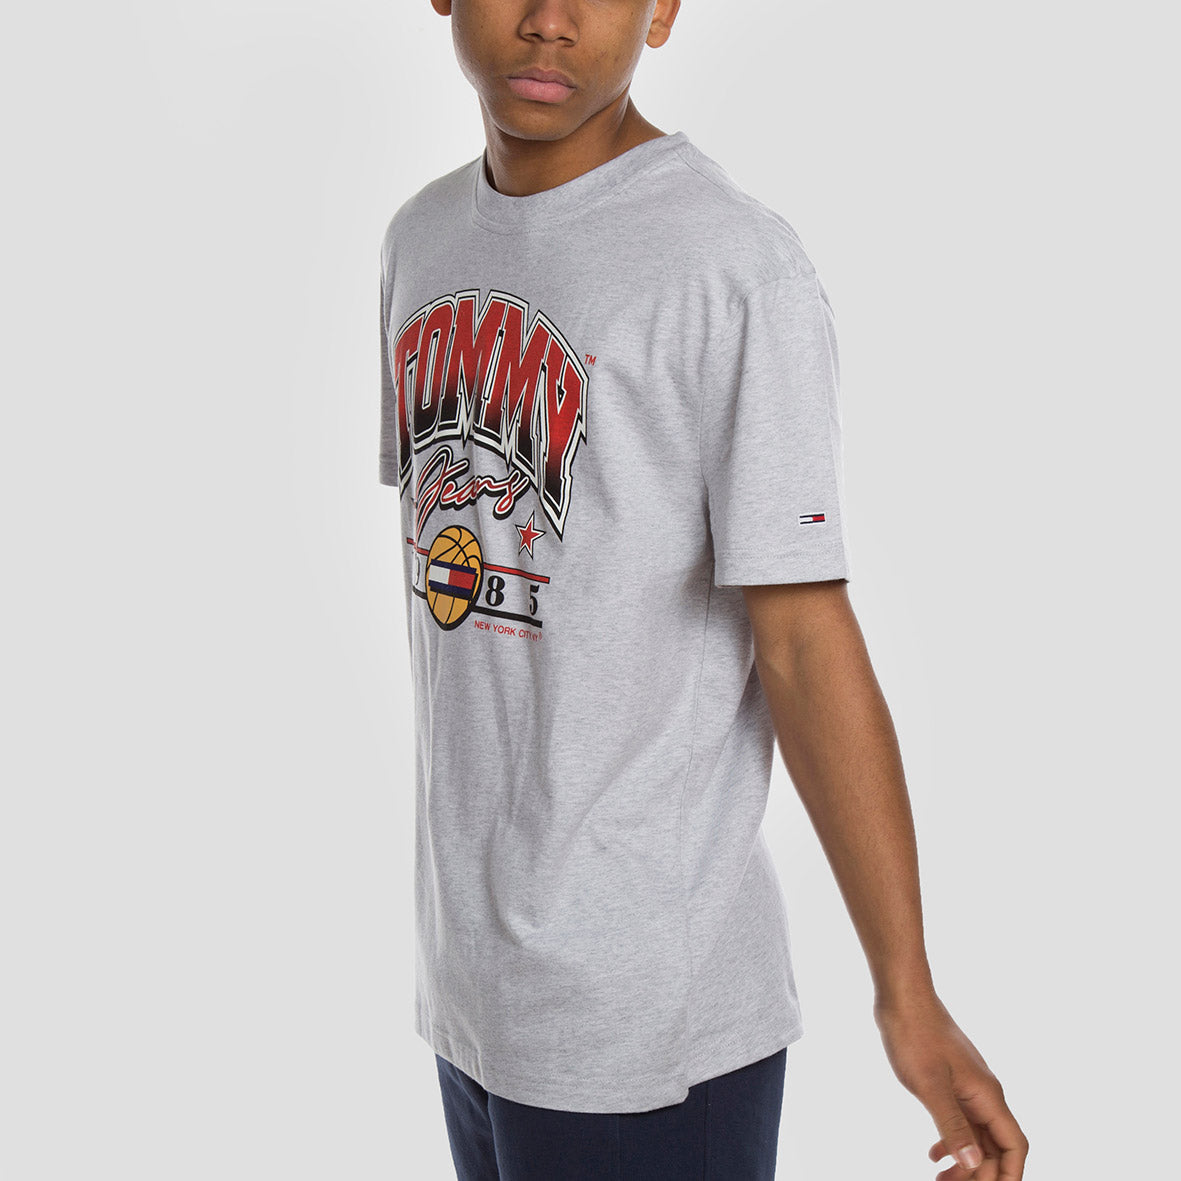 Tommy Jeans Camiseta Bball Graphic - DM0DM10220 - Colección Chico